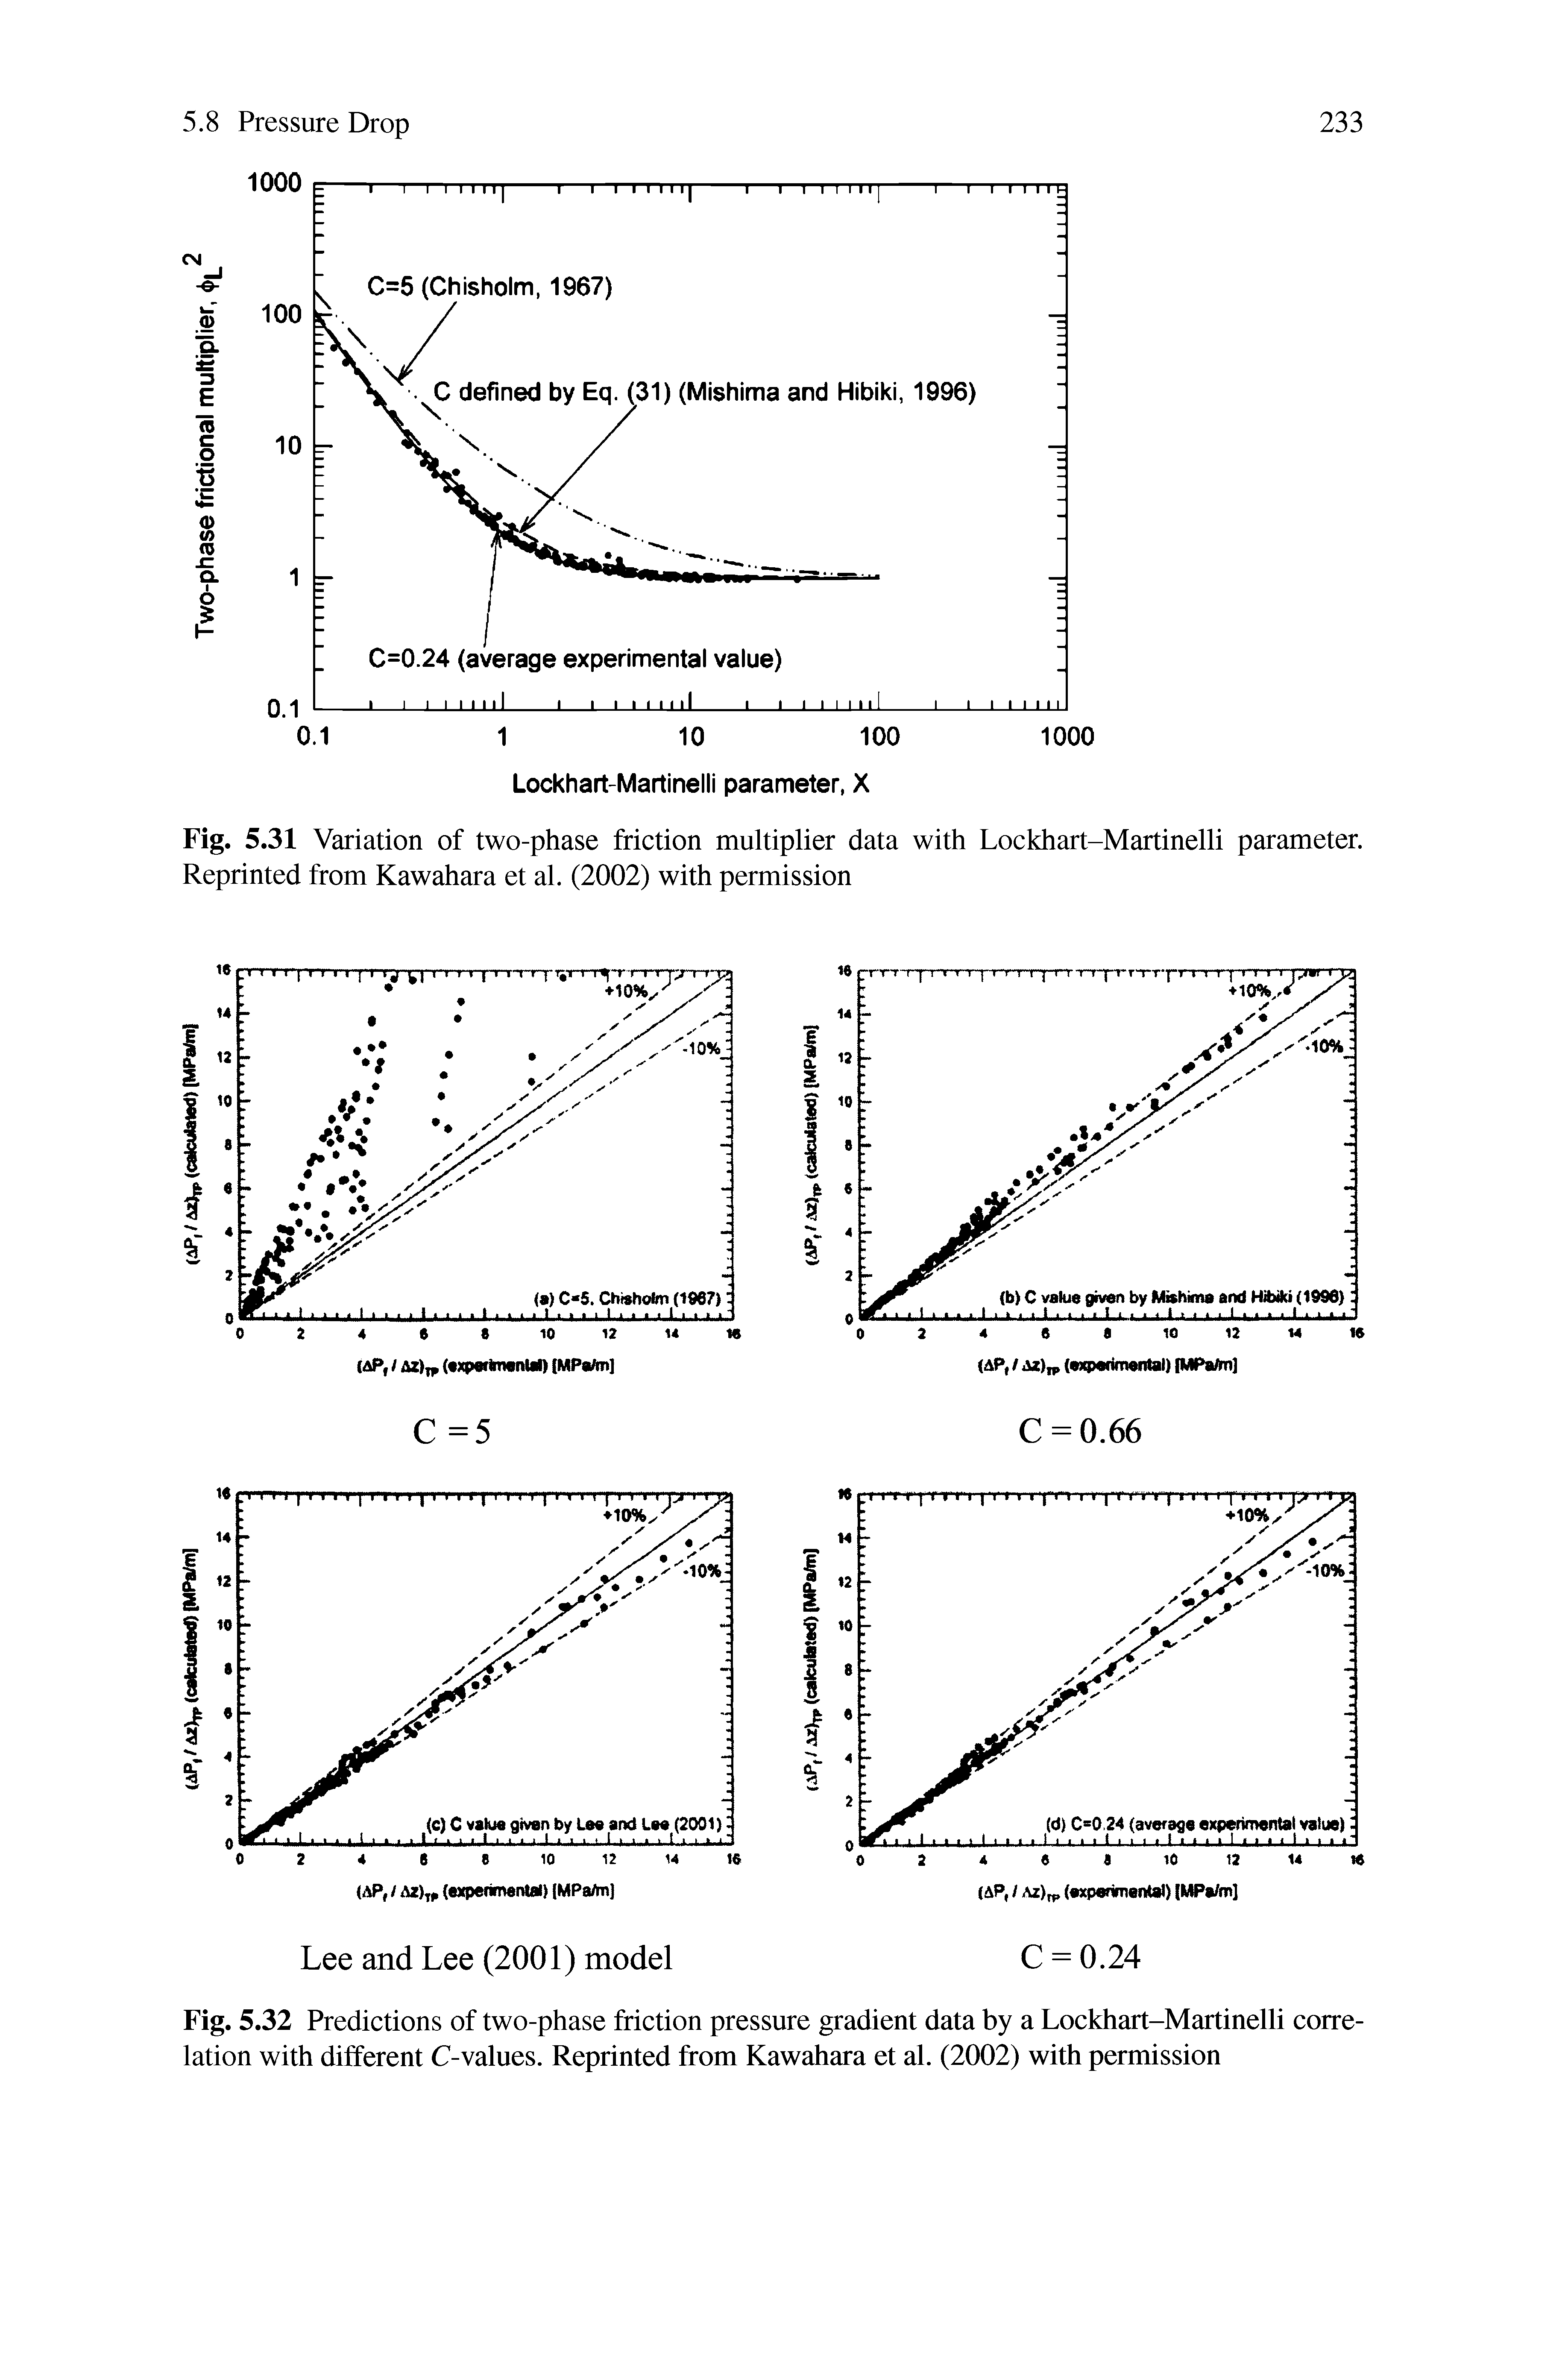 Fig. 5.32 Predictions of two-phase friction pressure gradient data by a Lockhart-Martinelli correlation with different C-values. Reprinted from Kawahara et al. (2002) with permission...